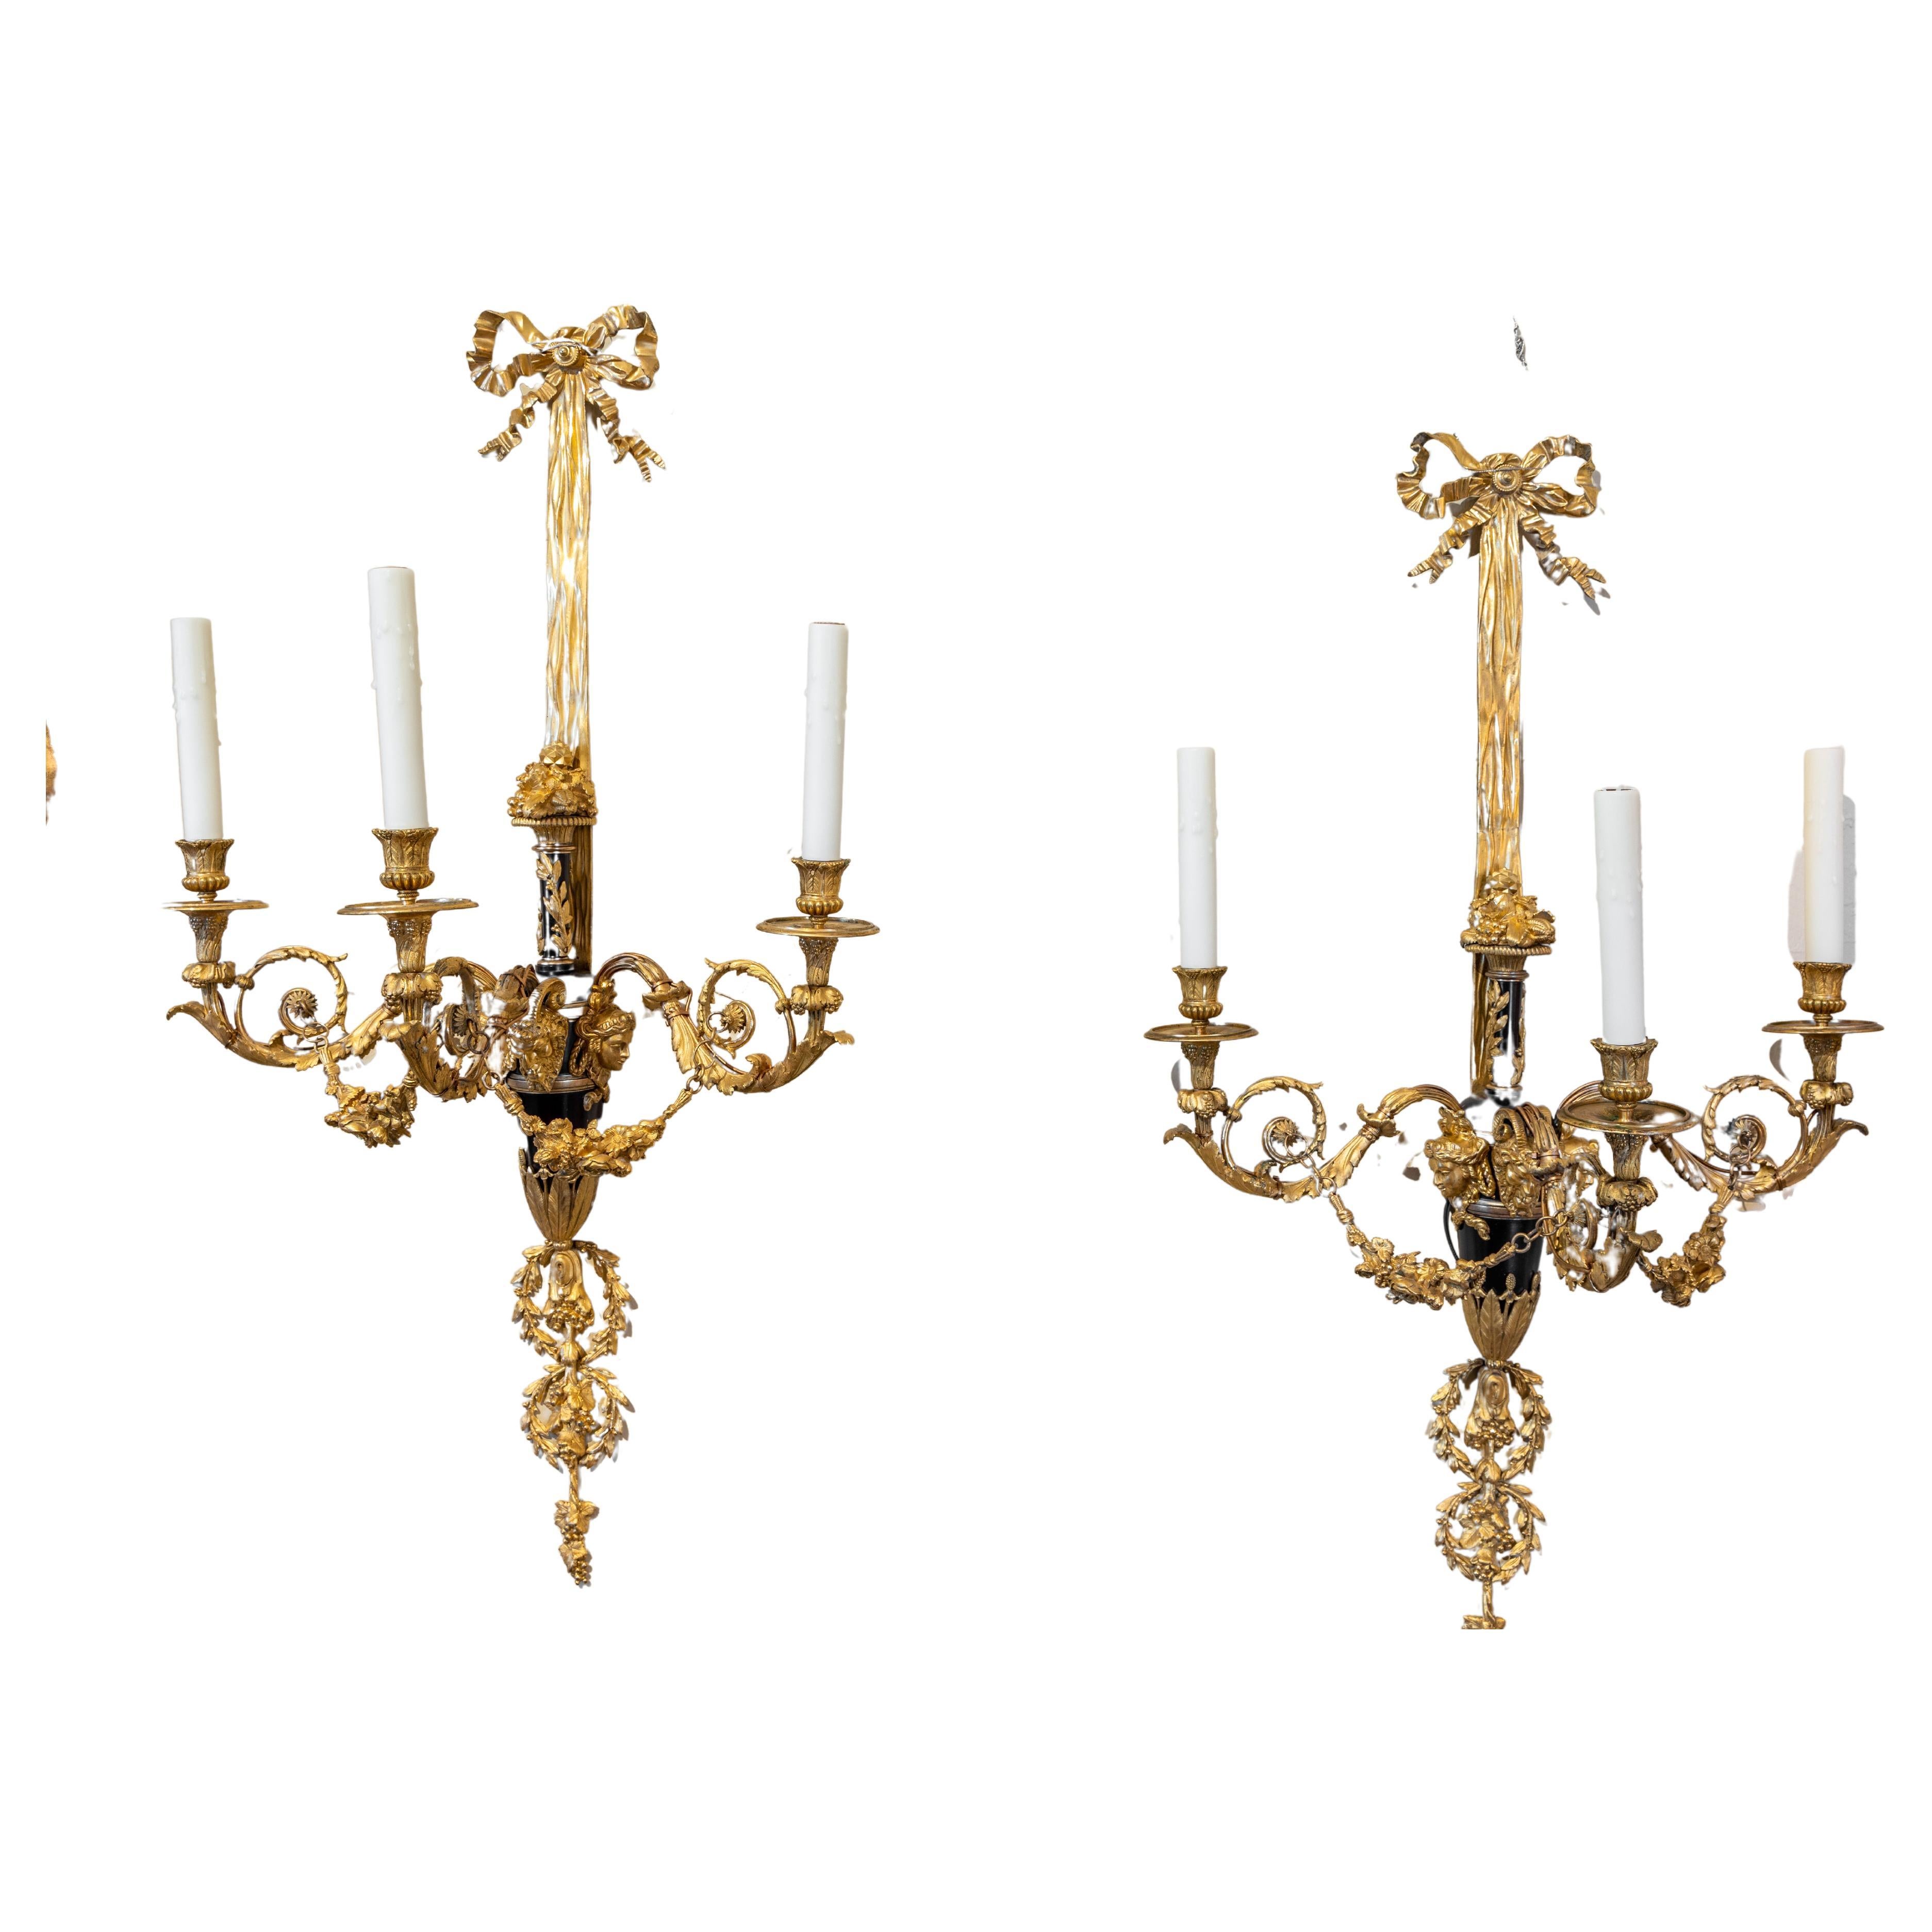 Very Fine Pair of 19th Century French Classical Gilt Bronze Large Sconces